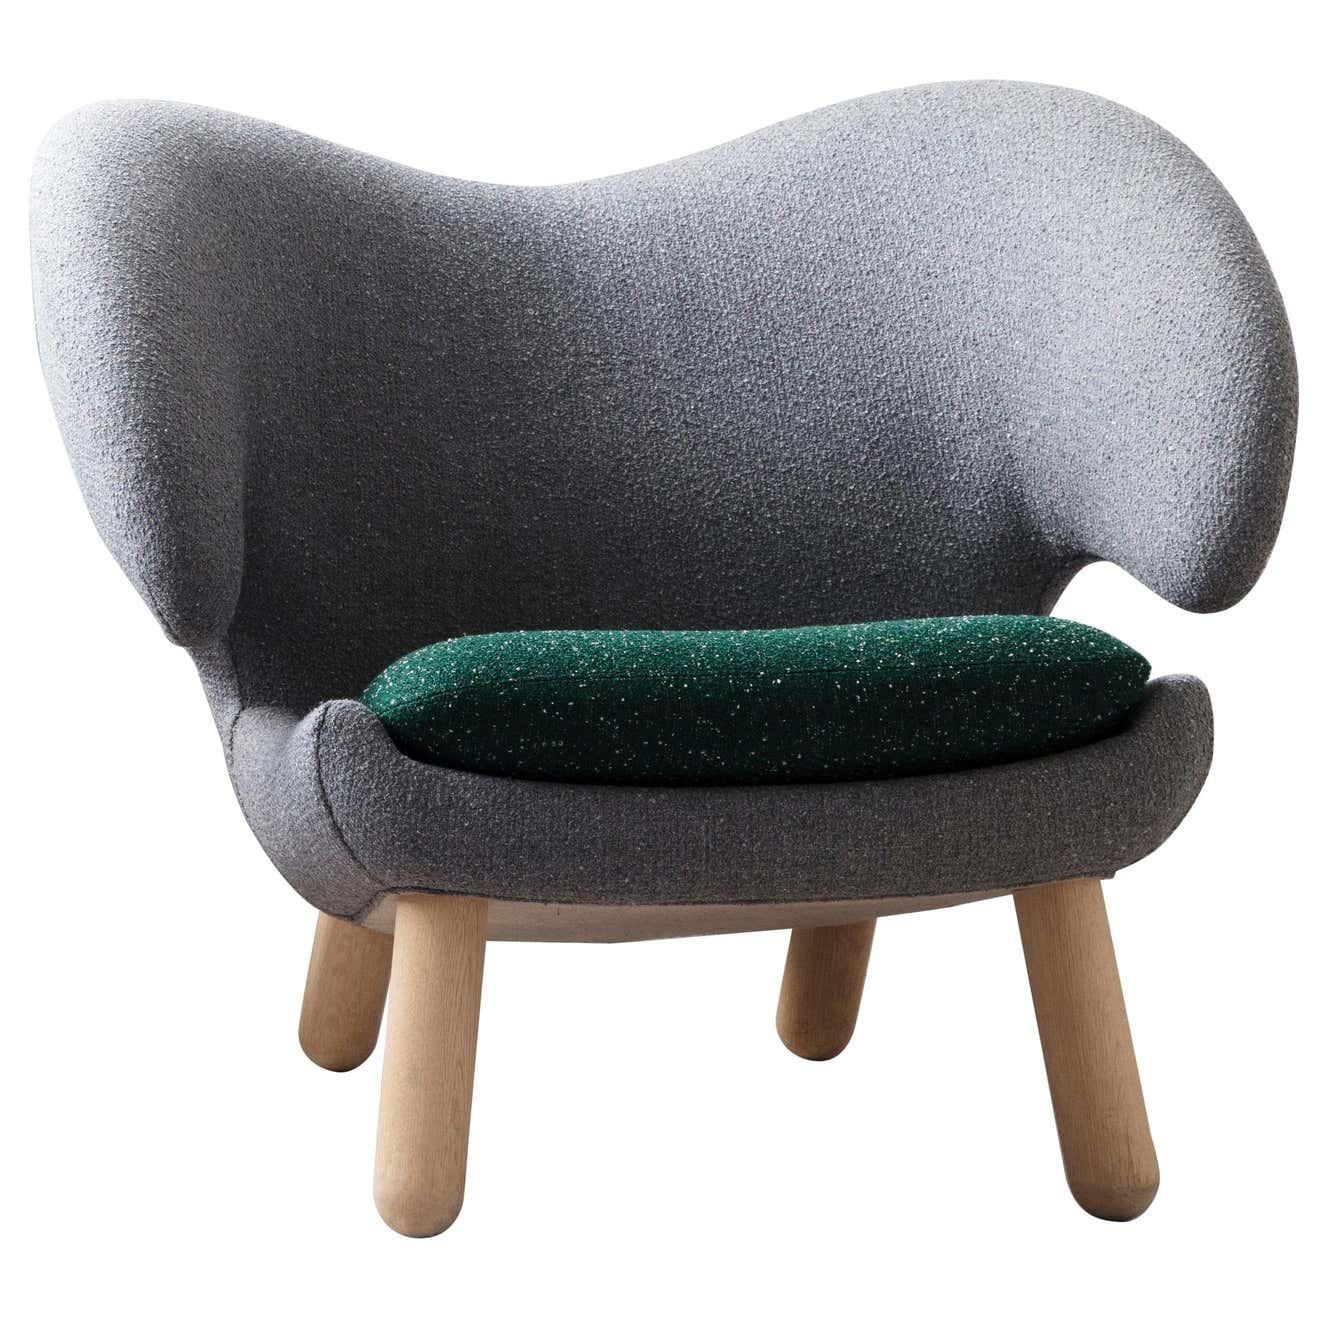 Modern Set of Two Pelican Chairs in Fabric and Wood by Finn Juhl